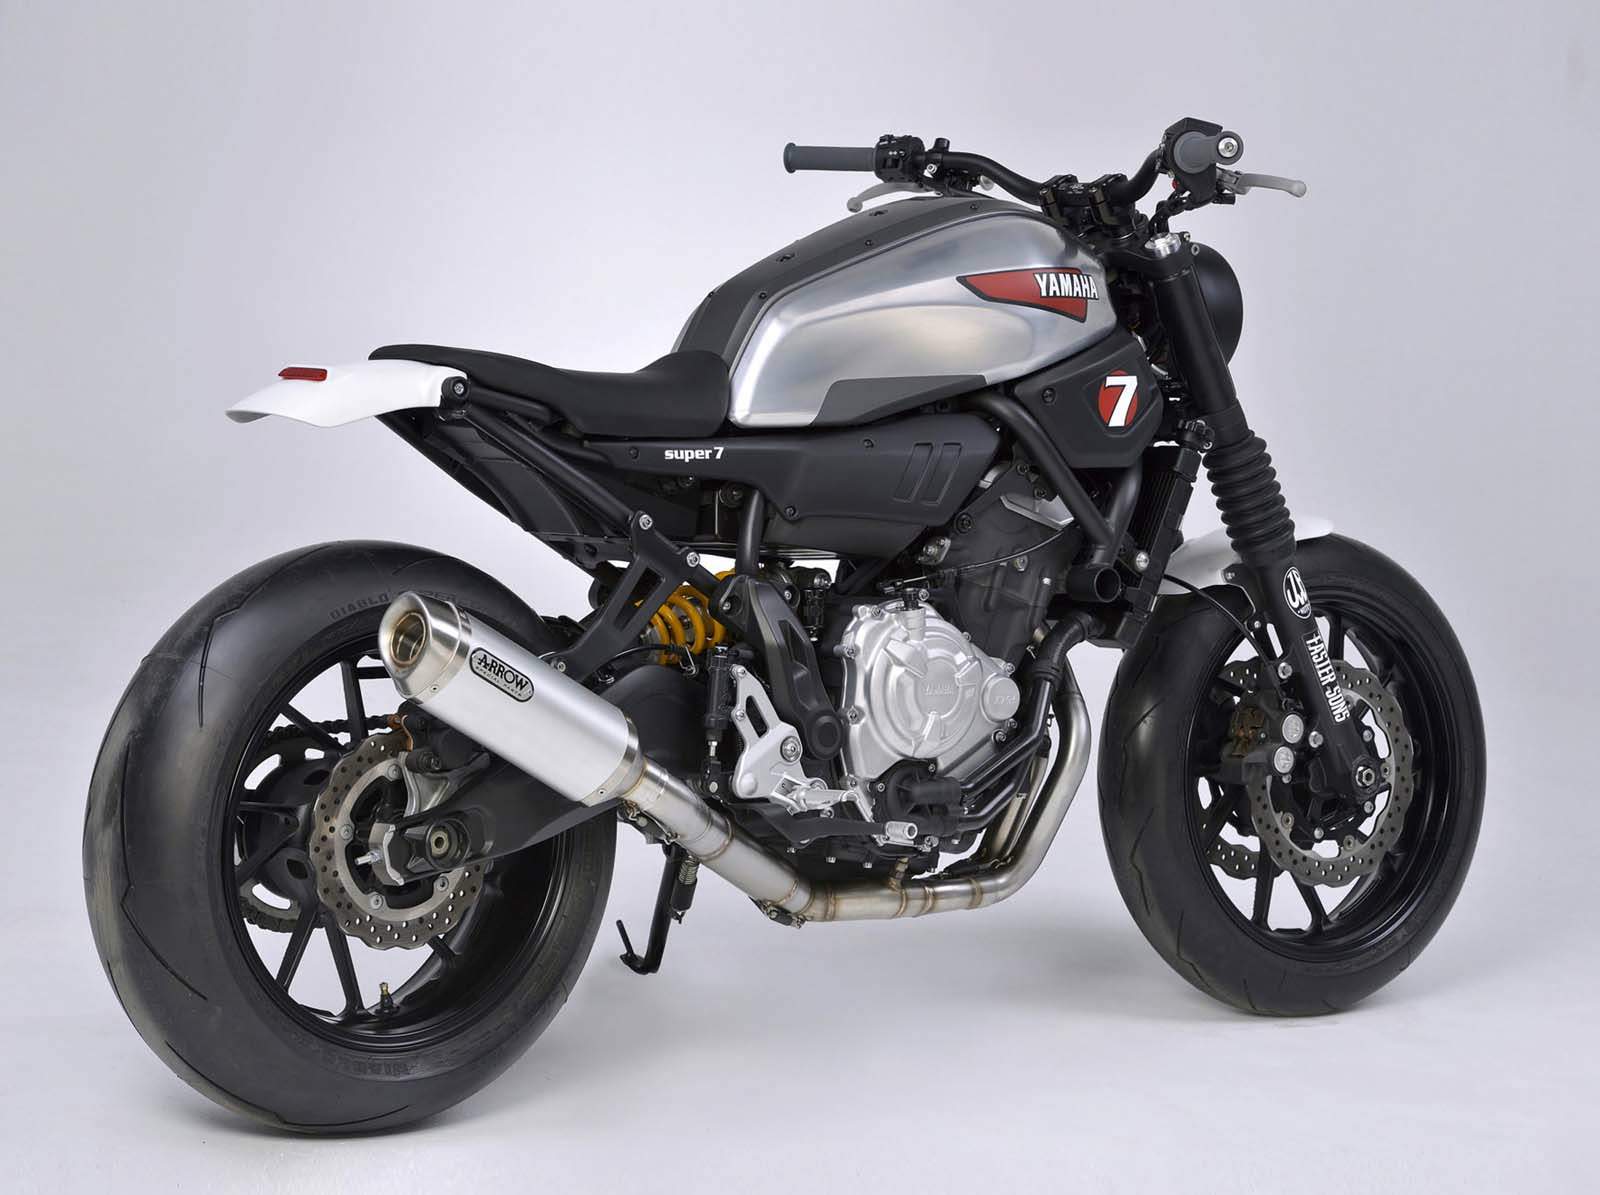 Yamaha XSR700 “Super 7” Yard Built by JvB-moto For Sale Specifications, Price and Images